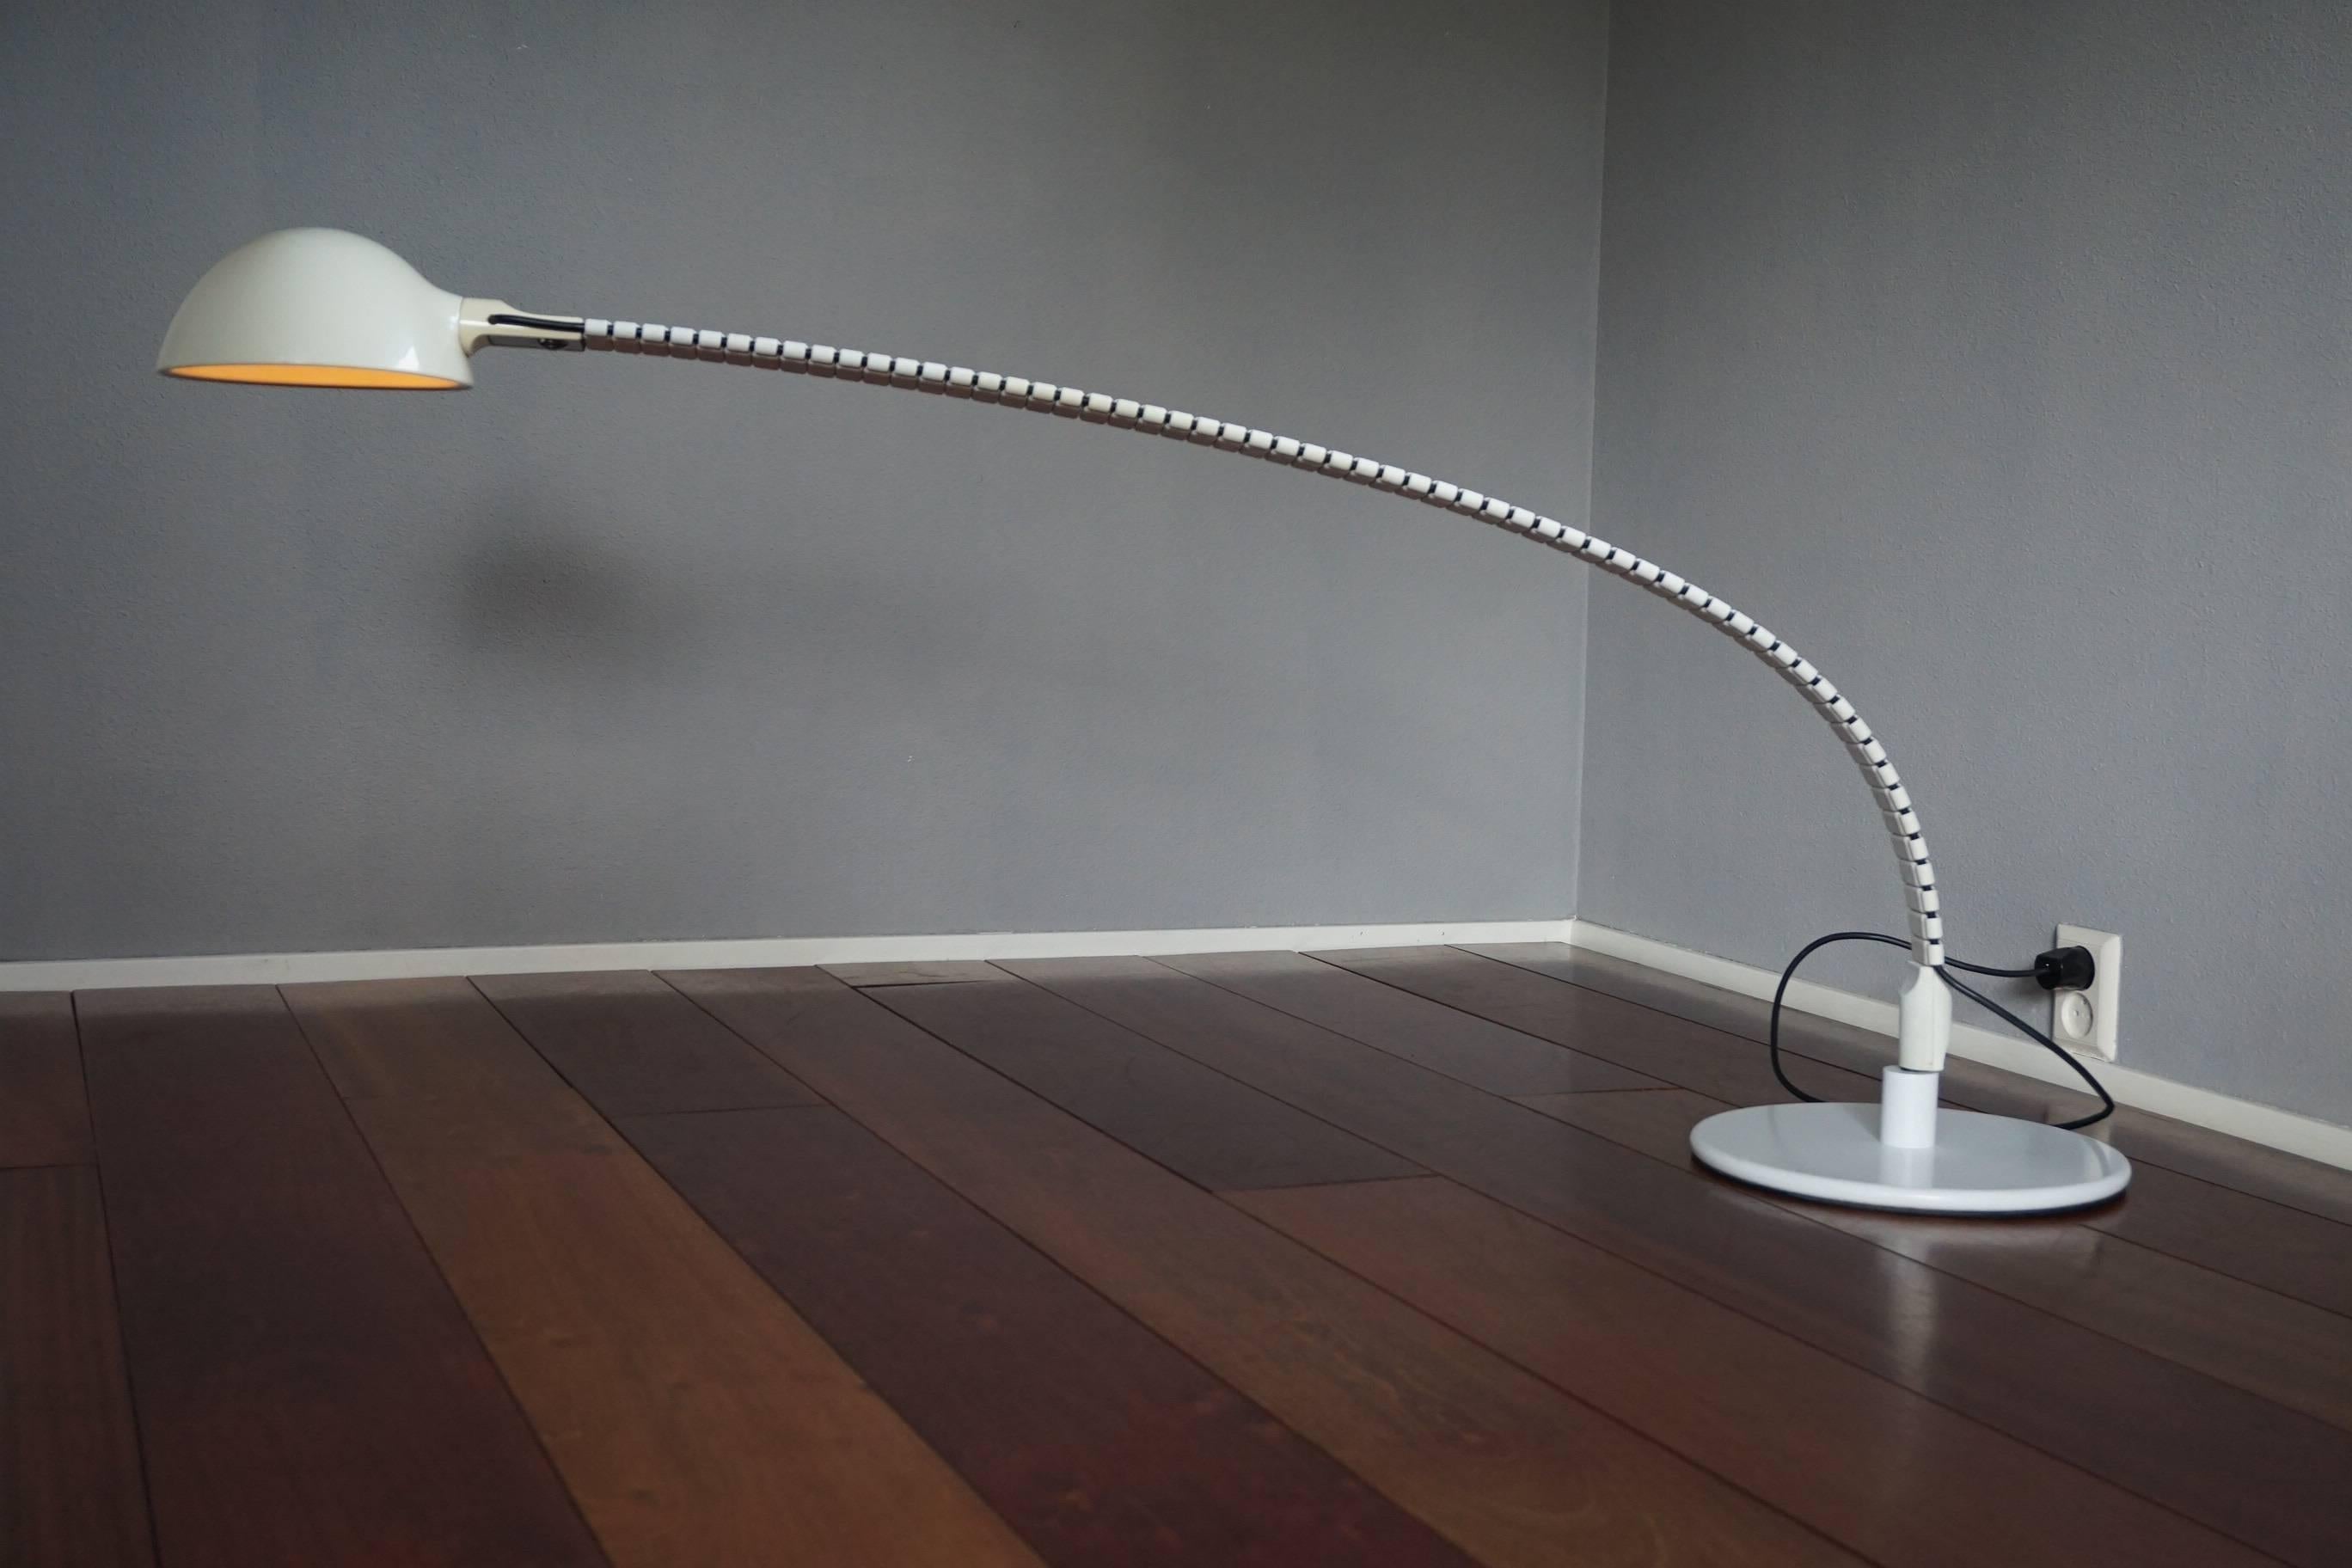 Stunning spinal-cord-shape, Italian design floor lamp.

If you are looking for a rare and good looking floor lamp to match your Mid-Century interior then this 1960s specimen could be perfect for you. This goose-neck design with a stylized 'spinal